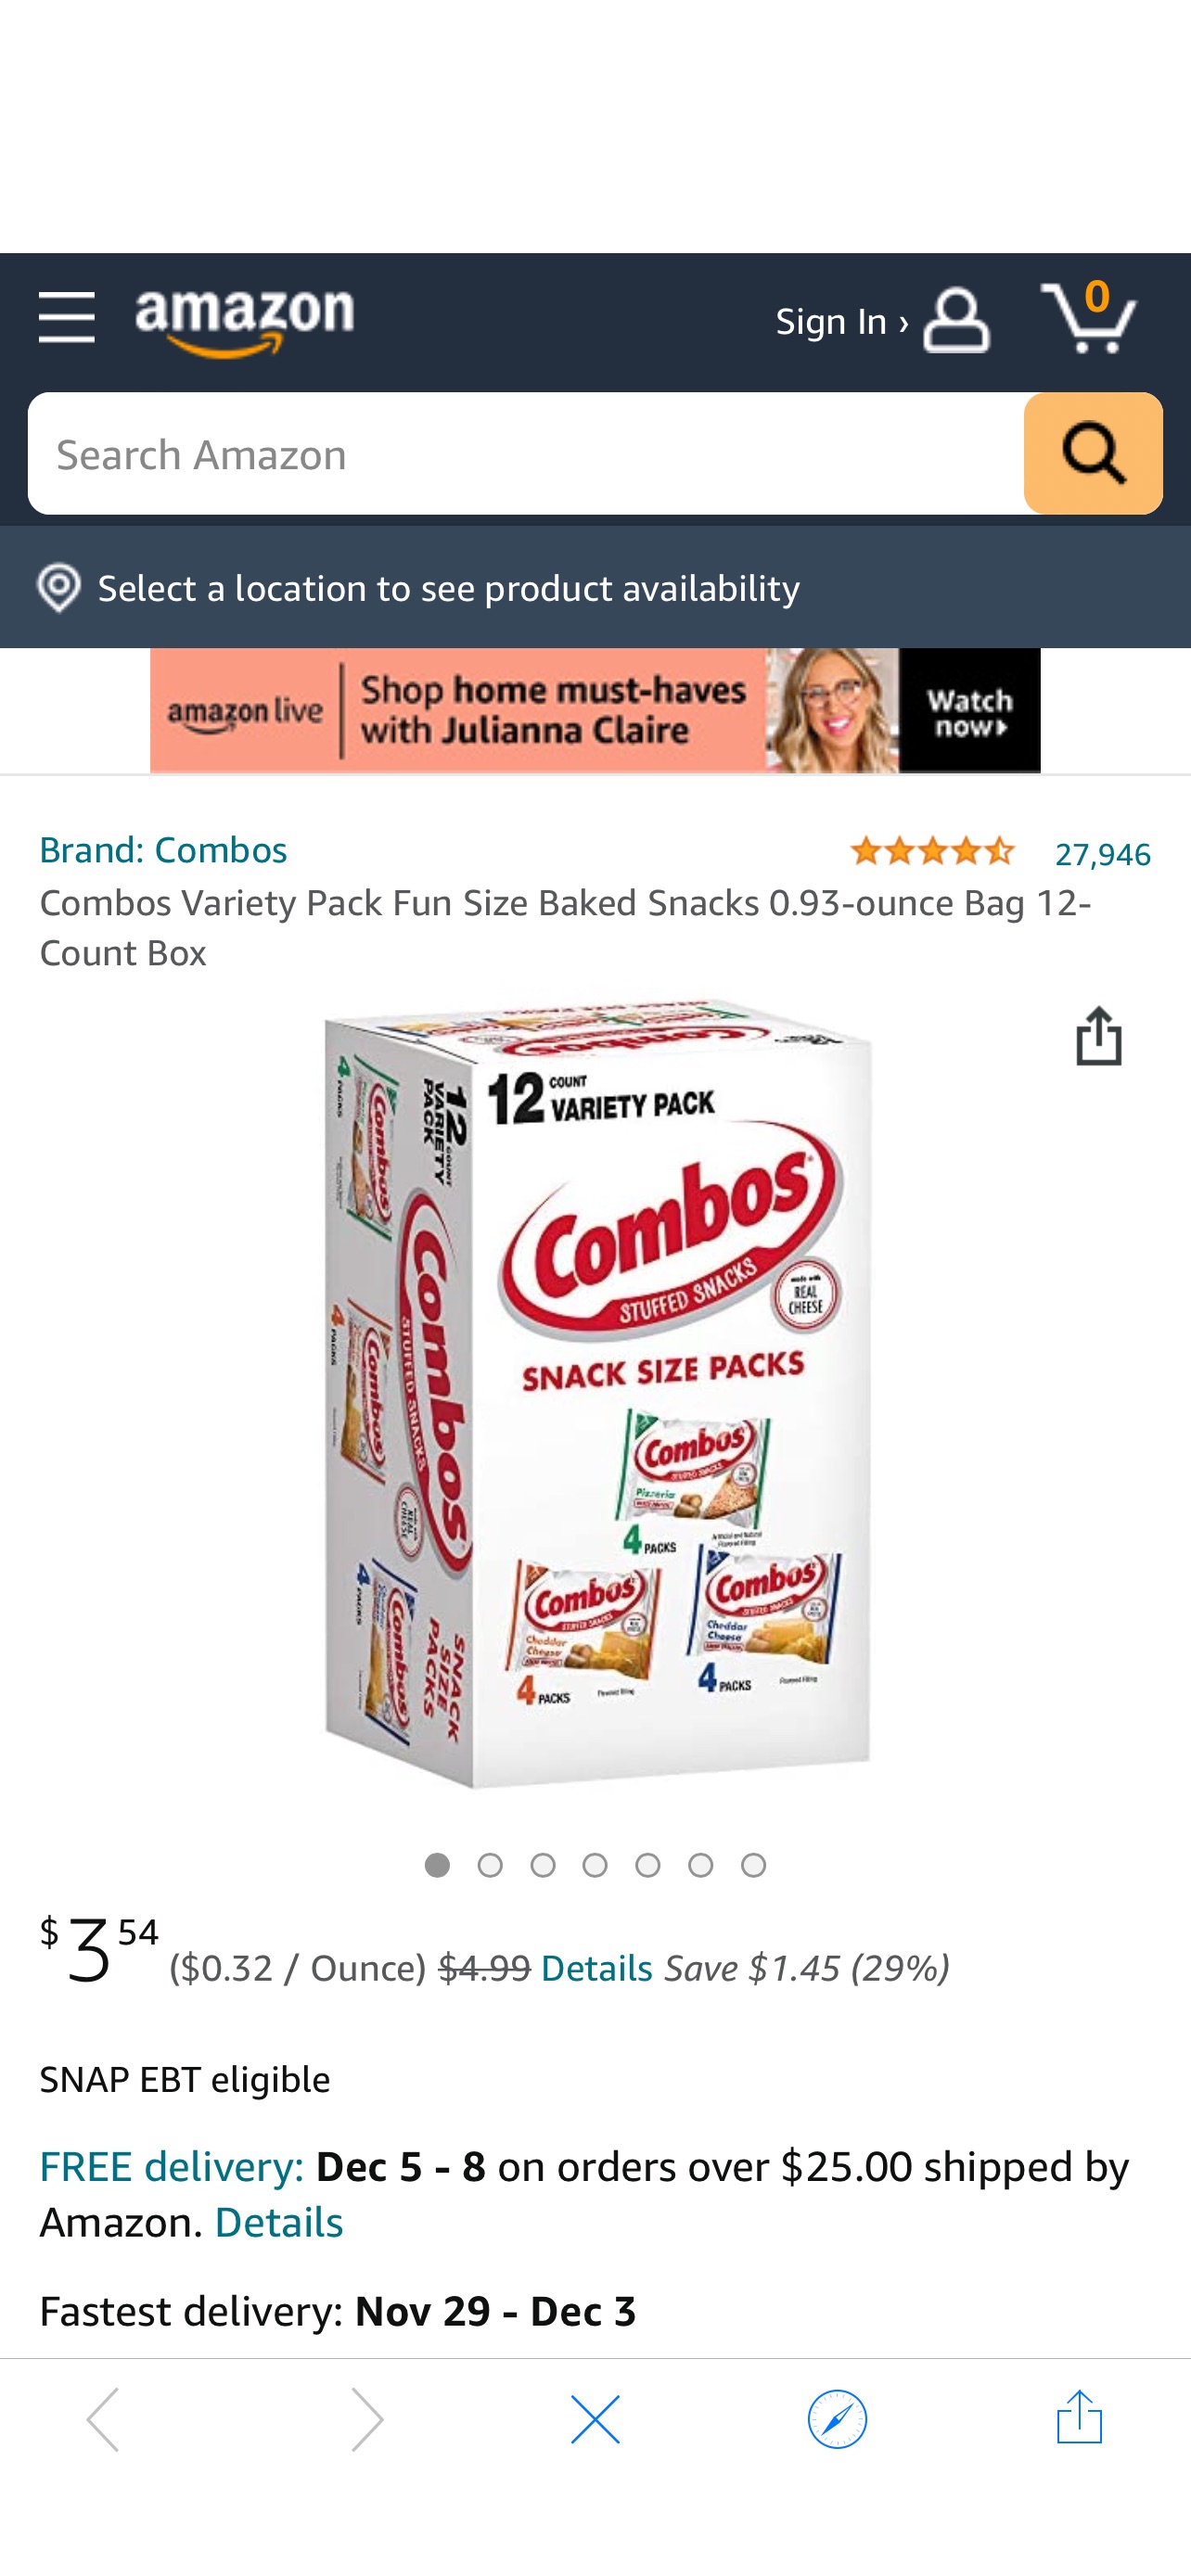 Amazon.com : Combos Variety Pack Fun Size Baked Snacks 0.93-ounce Bag 12-Count Box : Grocery & Gourmet Food 组合包